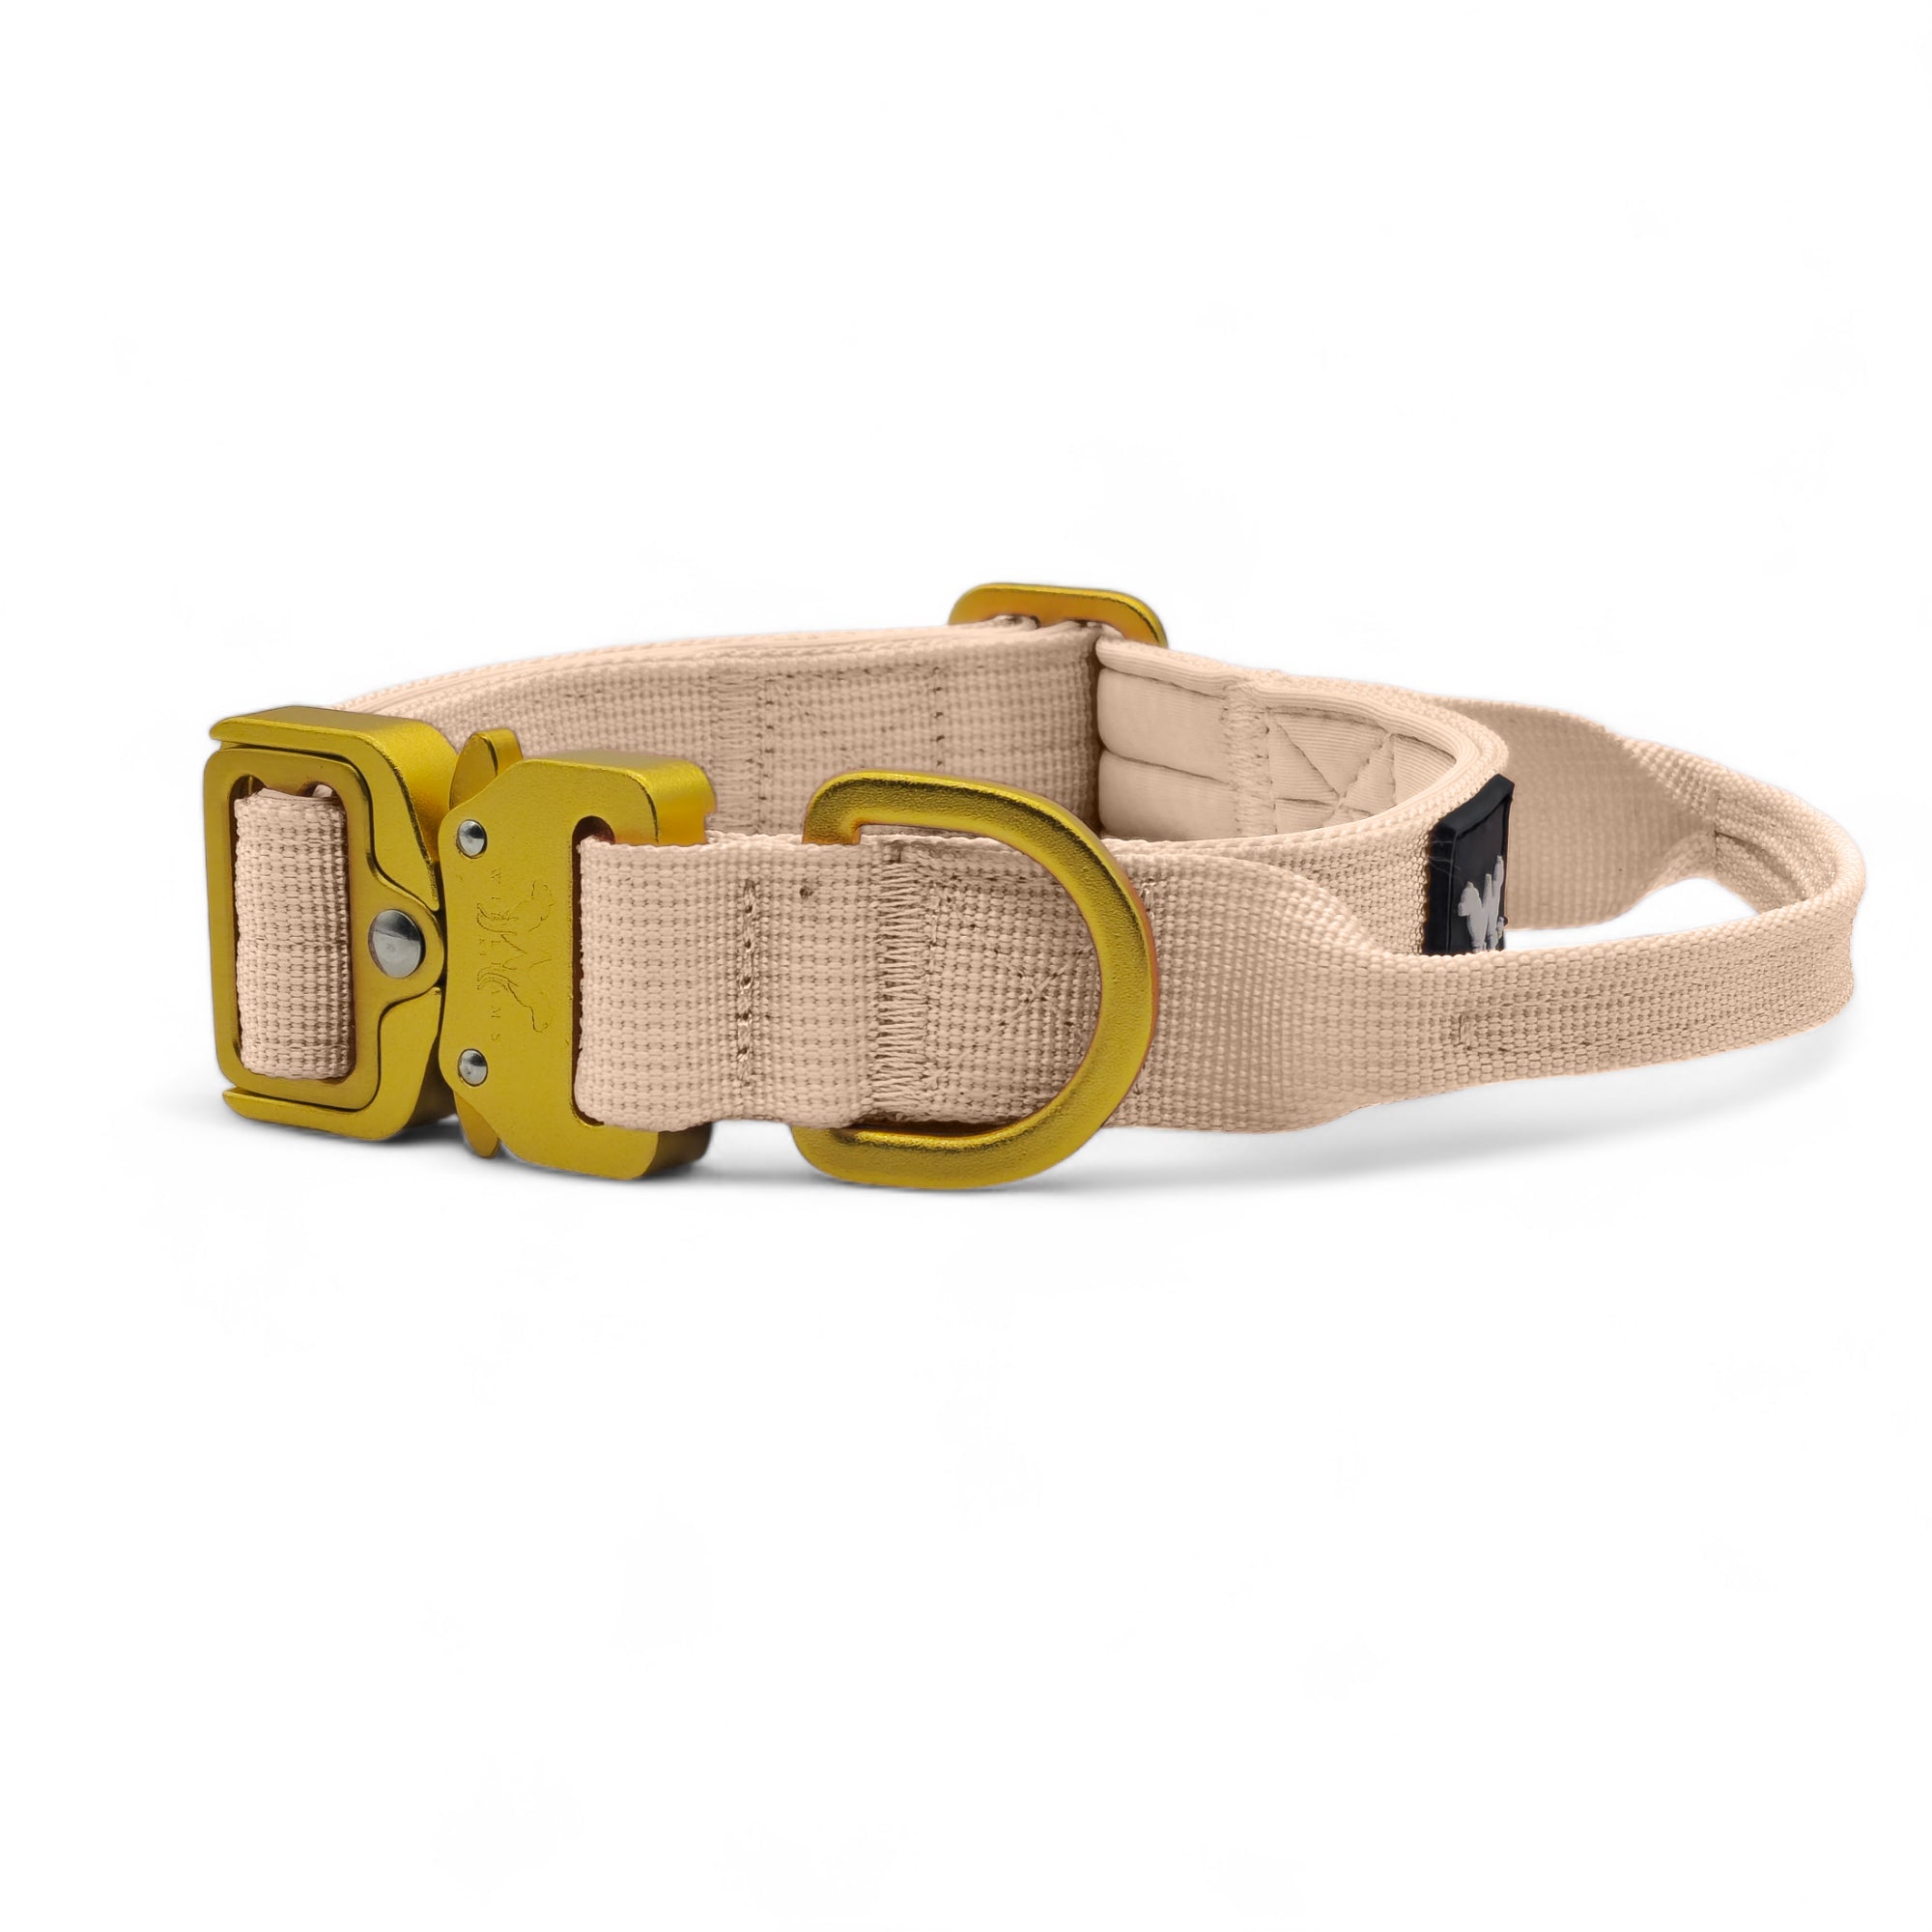 Light Tactical Collar 2.5CM Military Tan | Triple Stitched Nylon Lightweight Gold Aluminium Buckle + D Ring Adjustable Collar With Handle